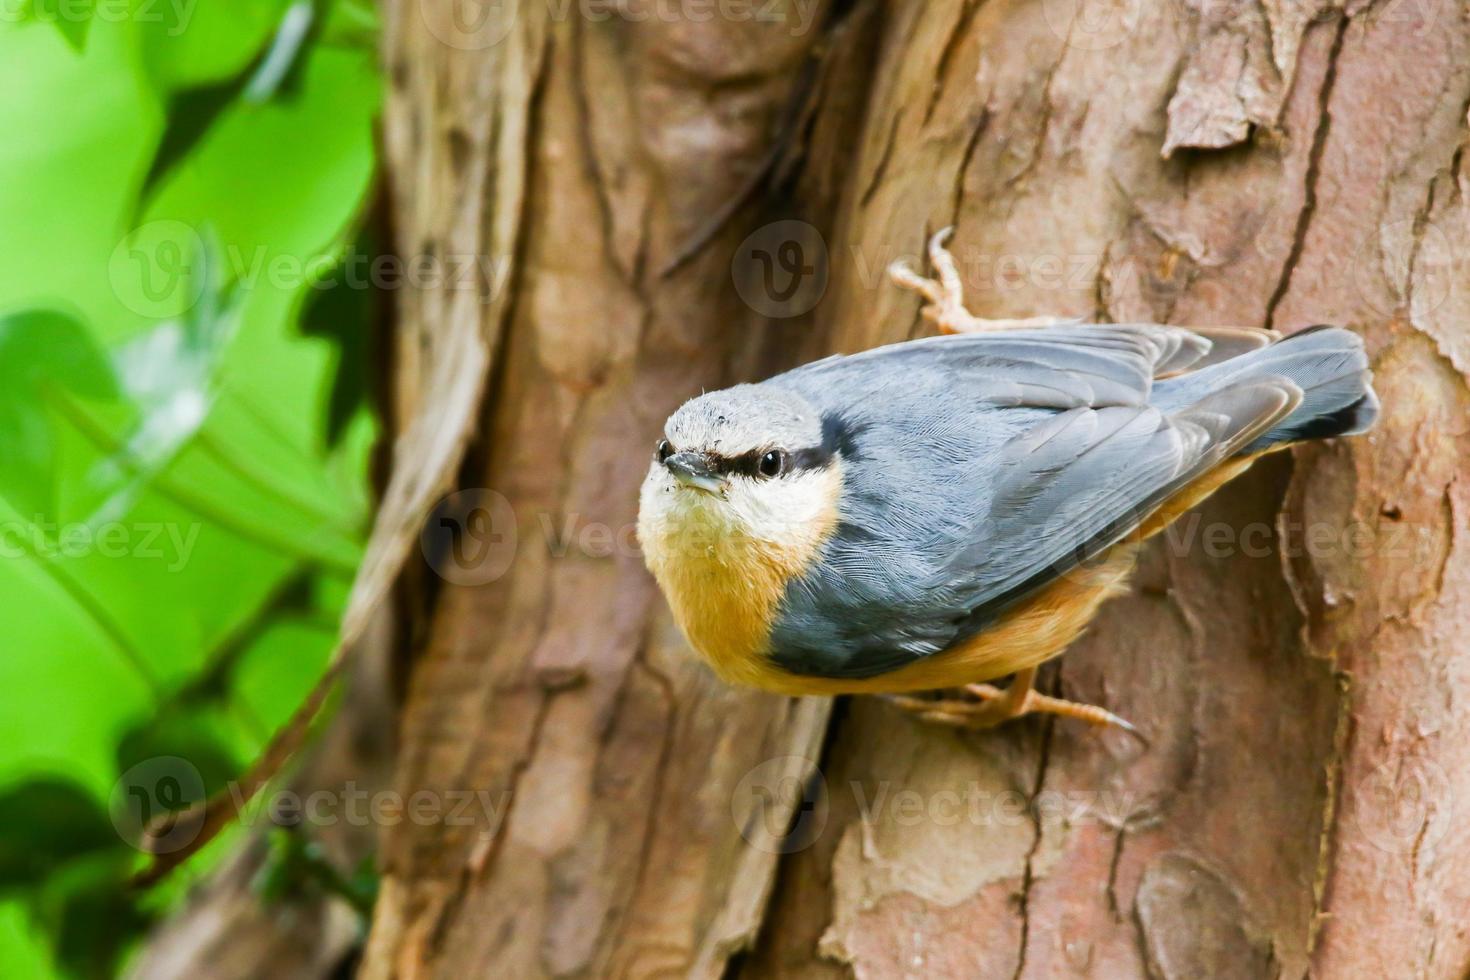 The Eurasian nuthatch or wood nuthatch, Sitta europaea, is a small passerine bird with blue back and orange lower part of body and a white head with black mask photo